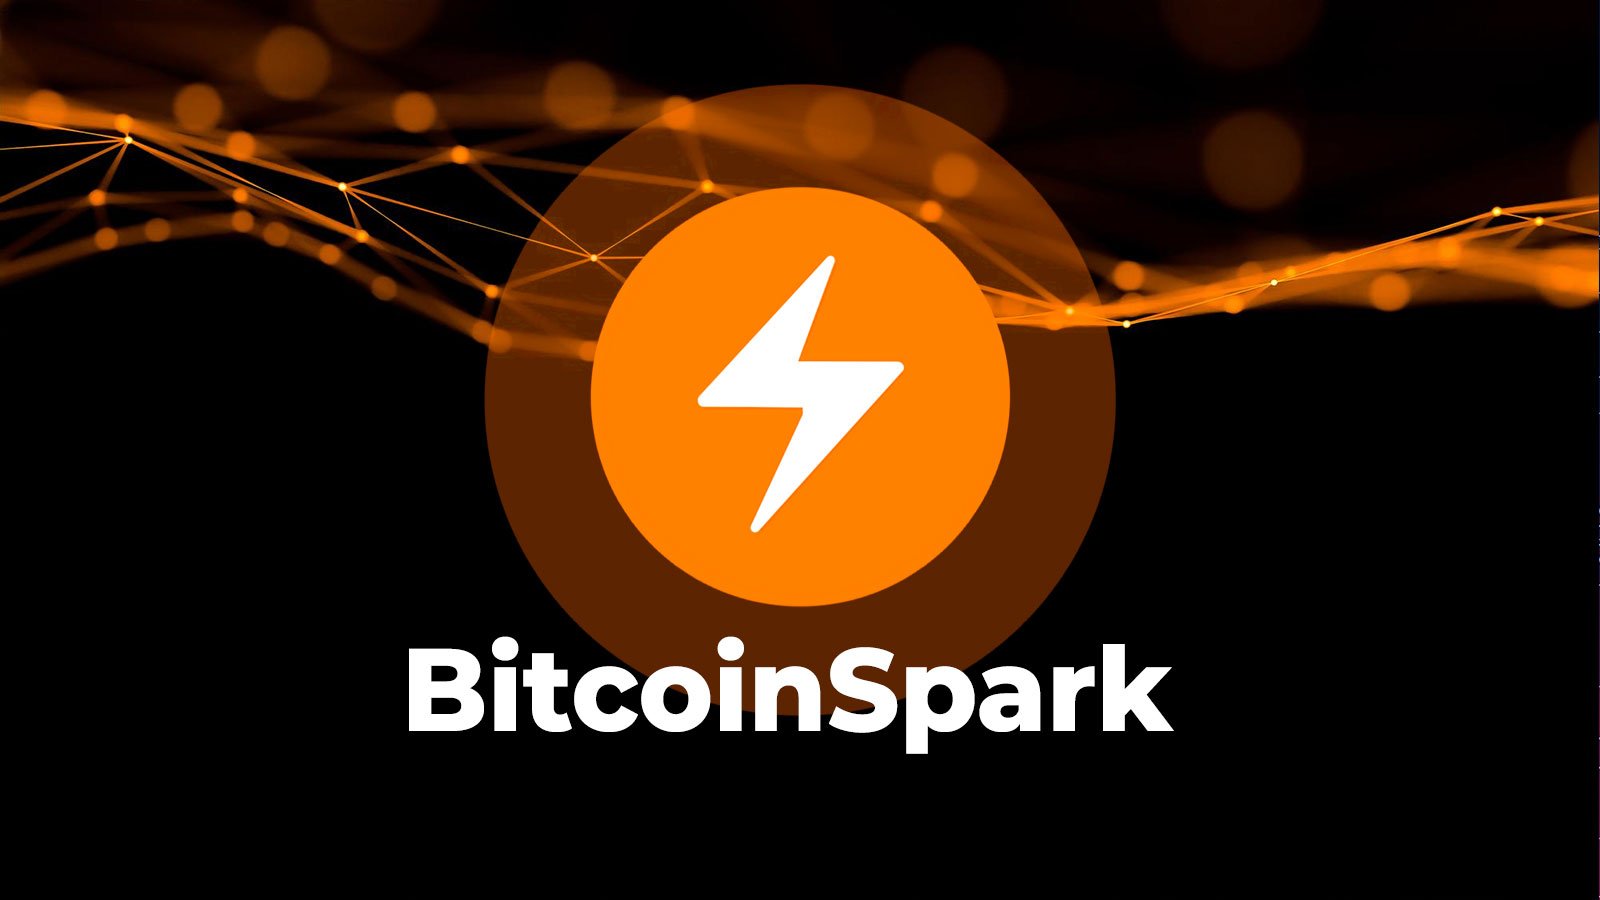 Bitcoin Spark Joins JasmyCoin and XRP In High Search Volume According To Google Analytics